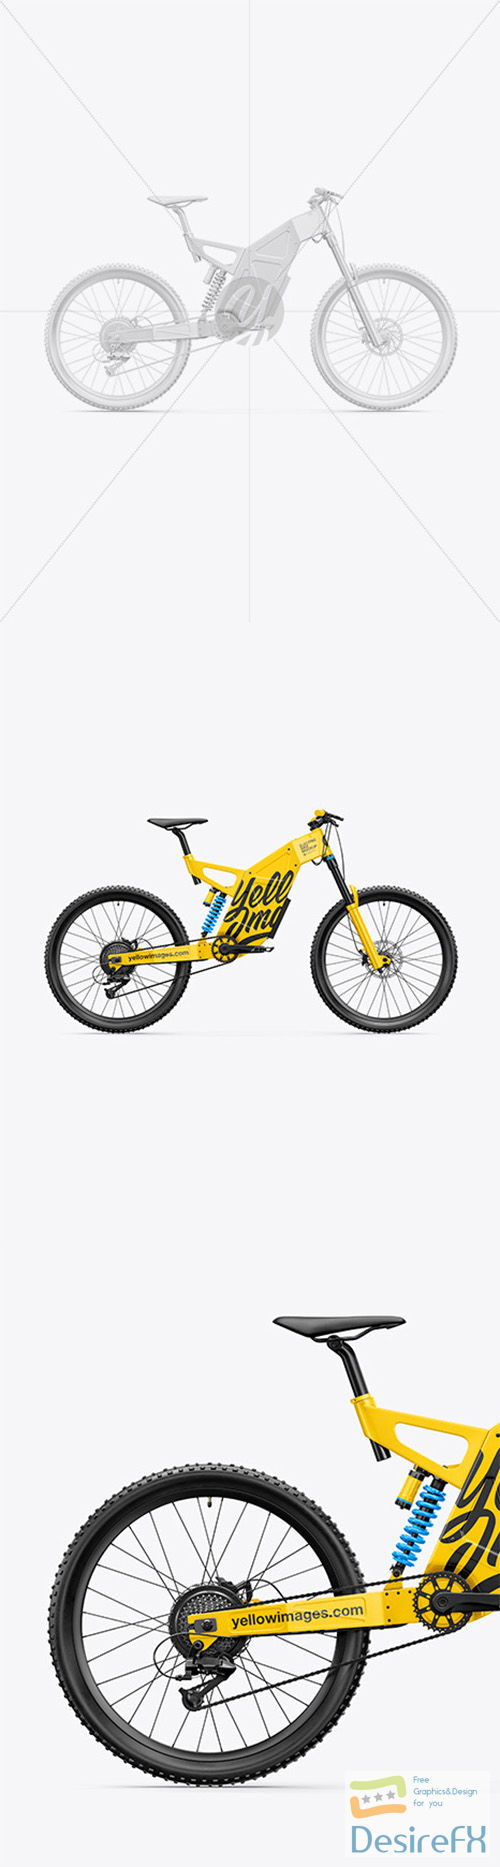 Electric Bike Mockup - Right Side View 66417